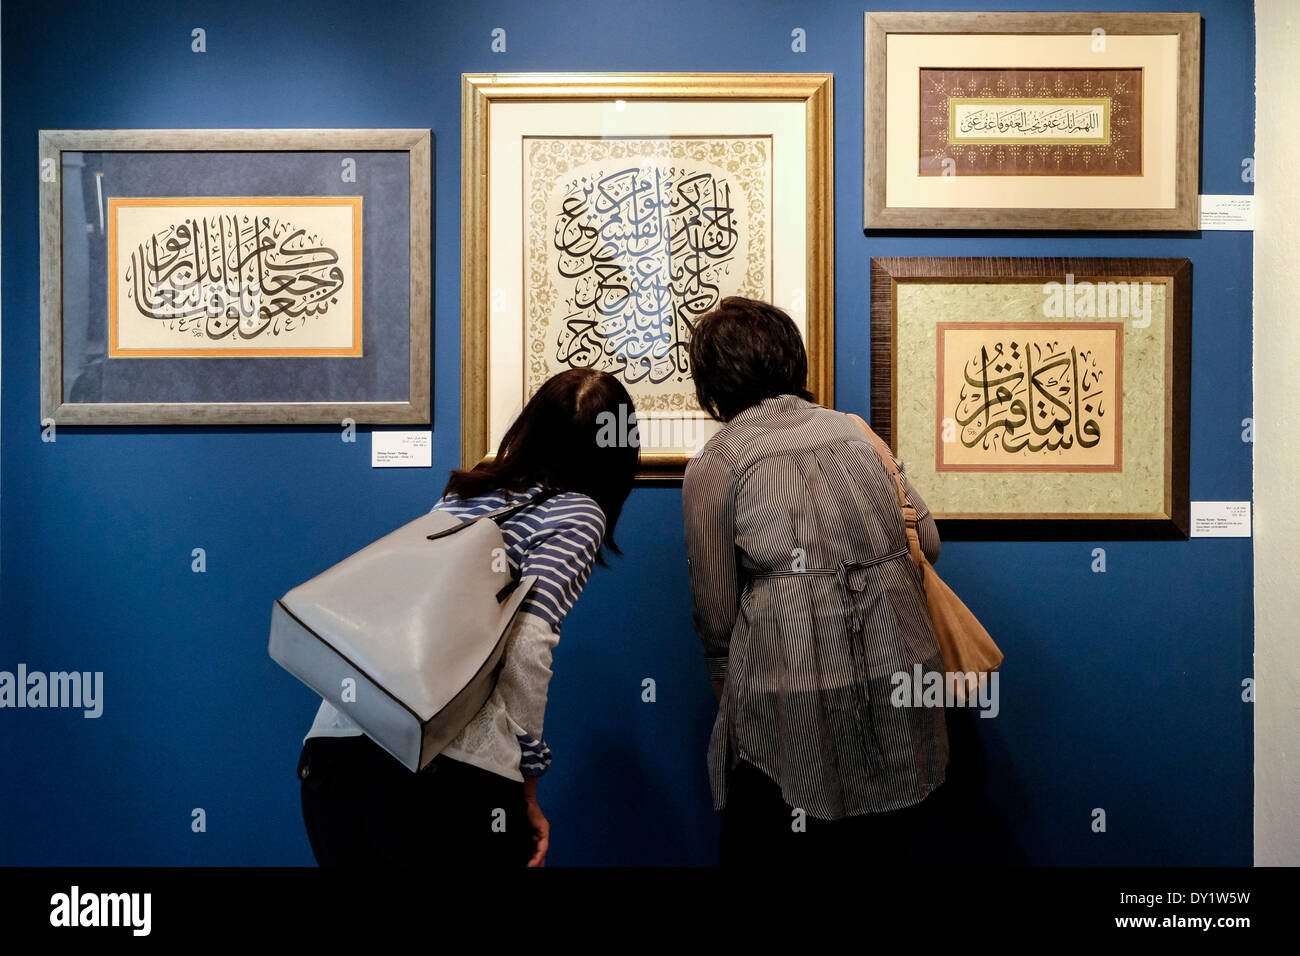 Sharjah, United Arab Emirates. 3rd April 2014; Opening day of Sharjah Calligraphy Biennial held in Emirate of Sharjah in United Arab Emirates. Credit:  Iain Masterton/Alamy Live News Stock Photo